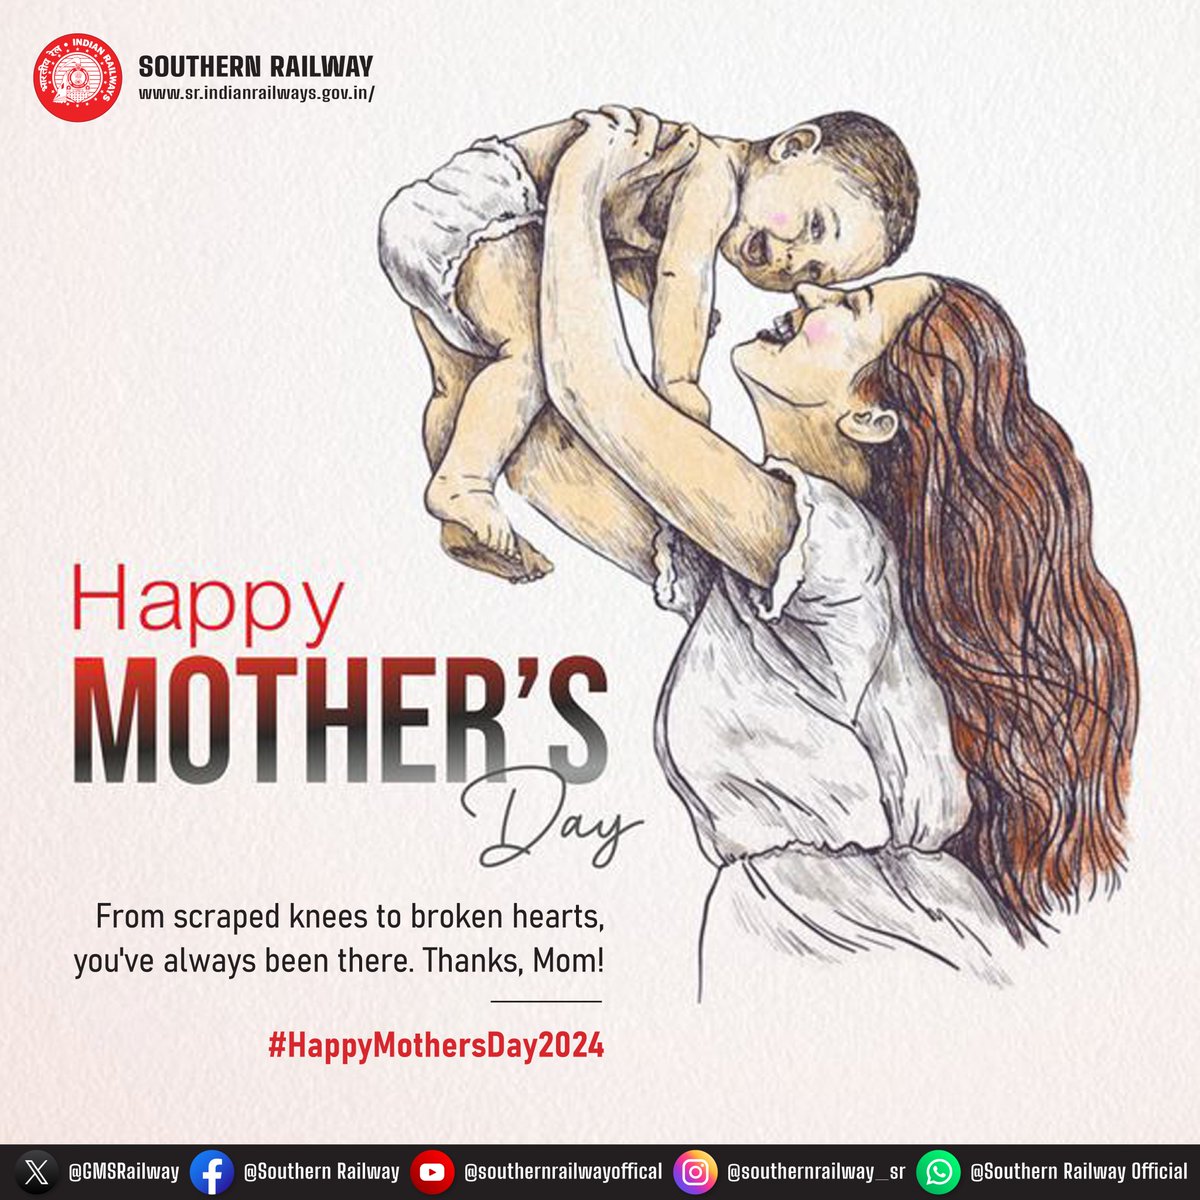 From scraped knees to broken hearts, Mom's always there to pick up the pieces What are you grateful for this Mother's Day? #MothersDay #LoveYouMom #SouthernRailway #HappyMothersDay